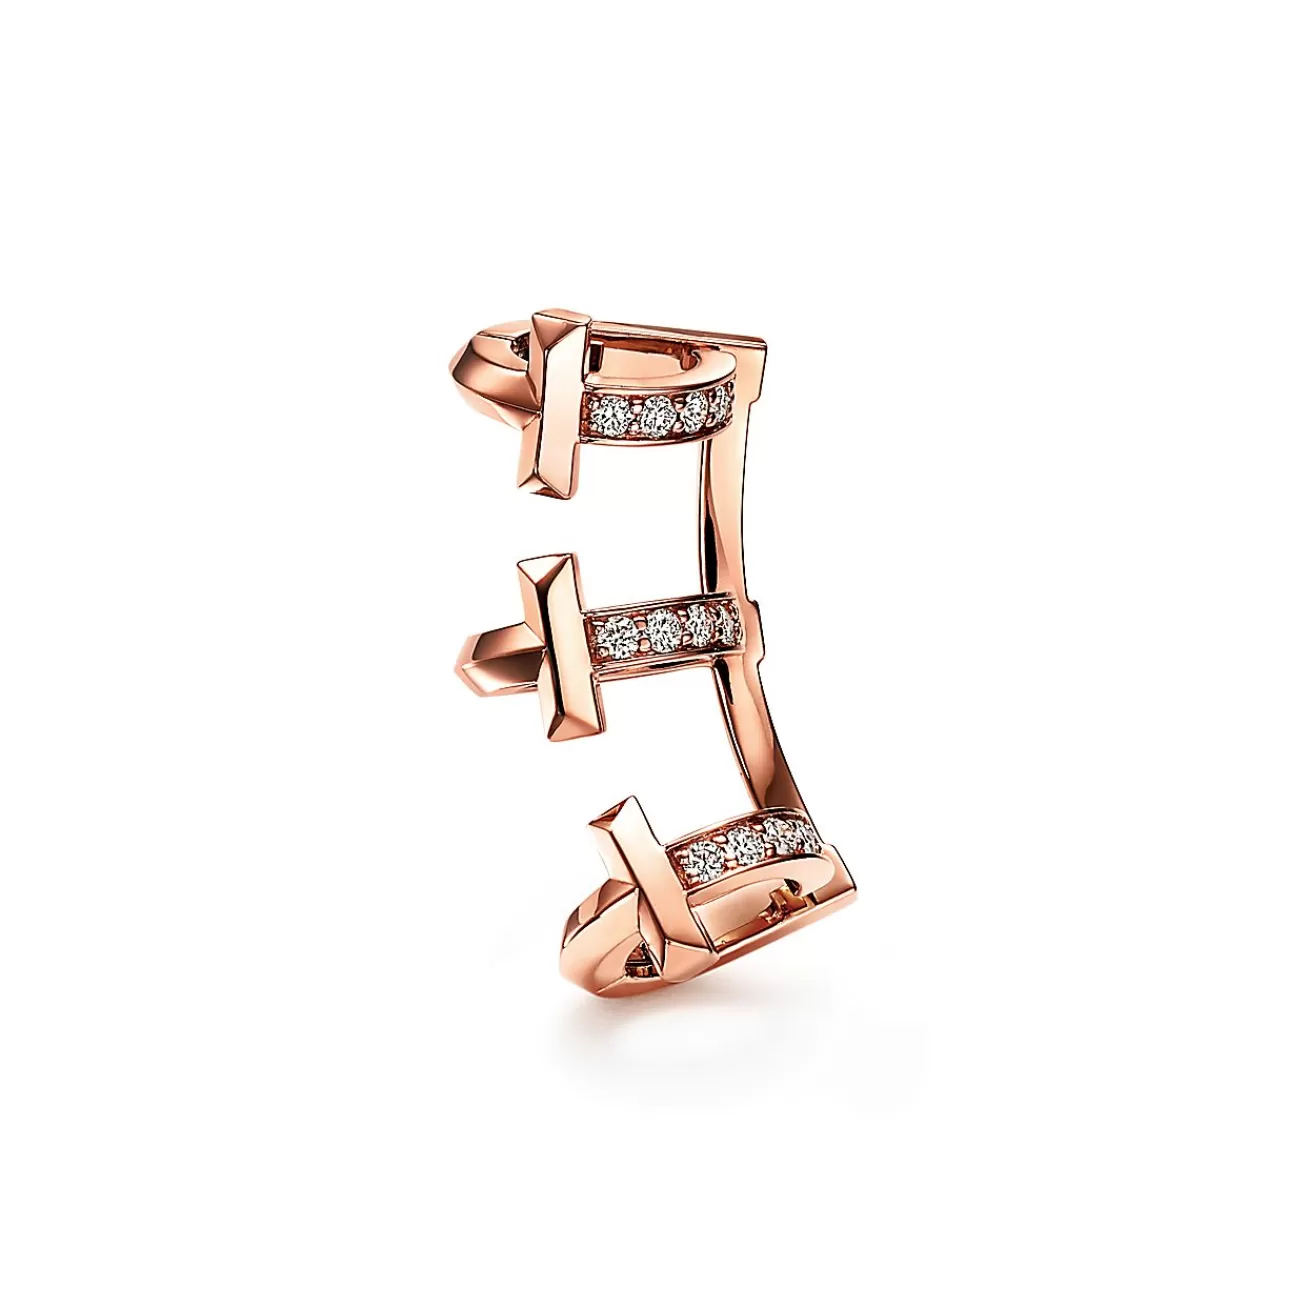 Tiffany & Co. Tiffany T T1 Ear Cuff in Rose Gold with Diamonds | ^ Earrings | Rose Gold Jewelry